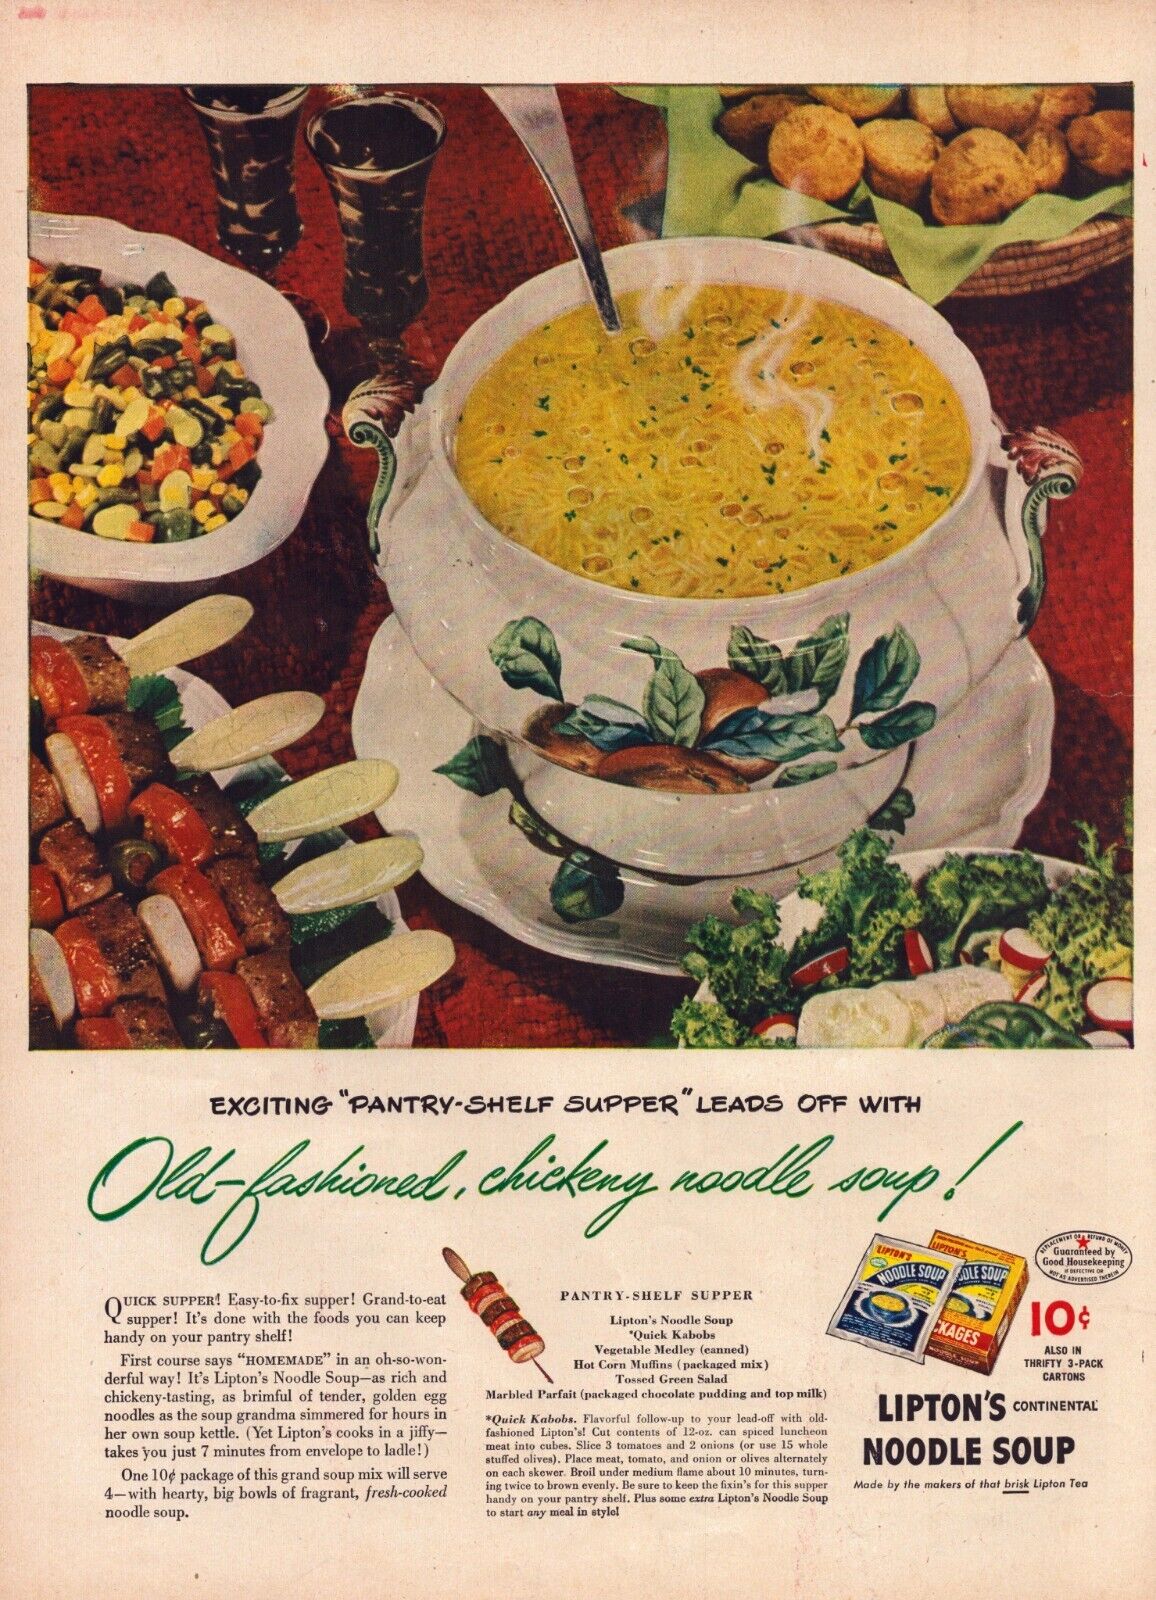 1945 Lipton Noodle Soup Print Ad WWII Old Fashioned Chicken Pantry Shelf Supper